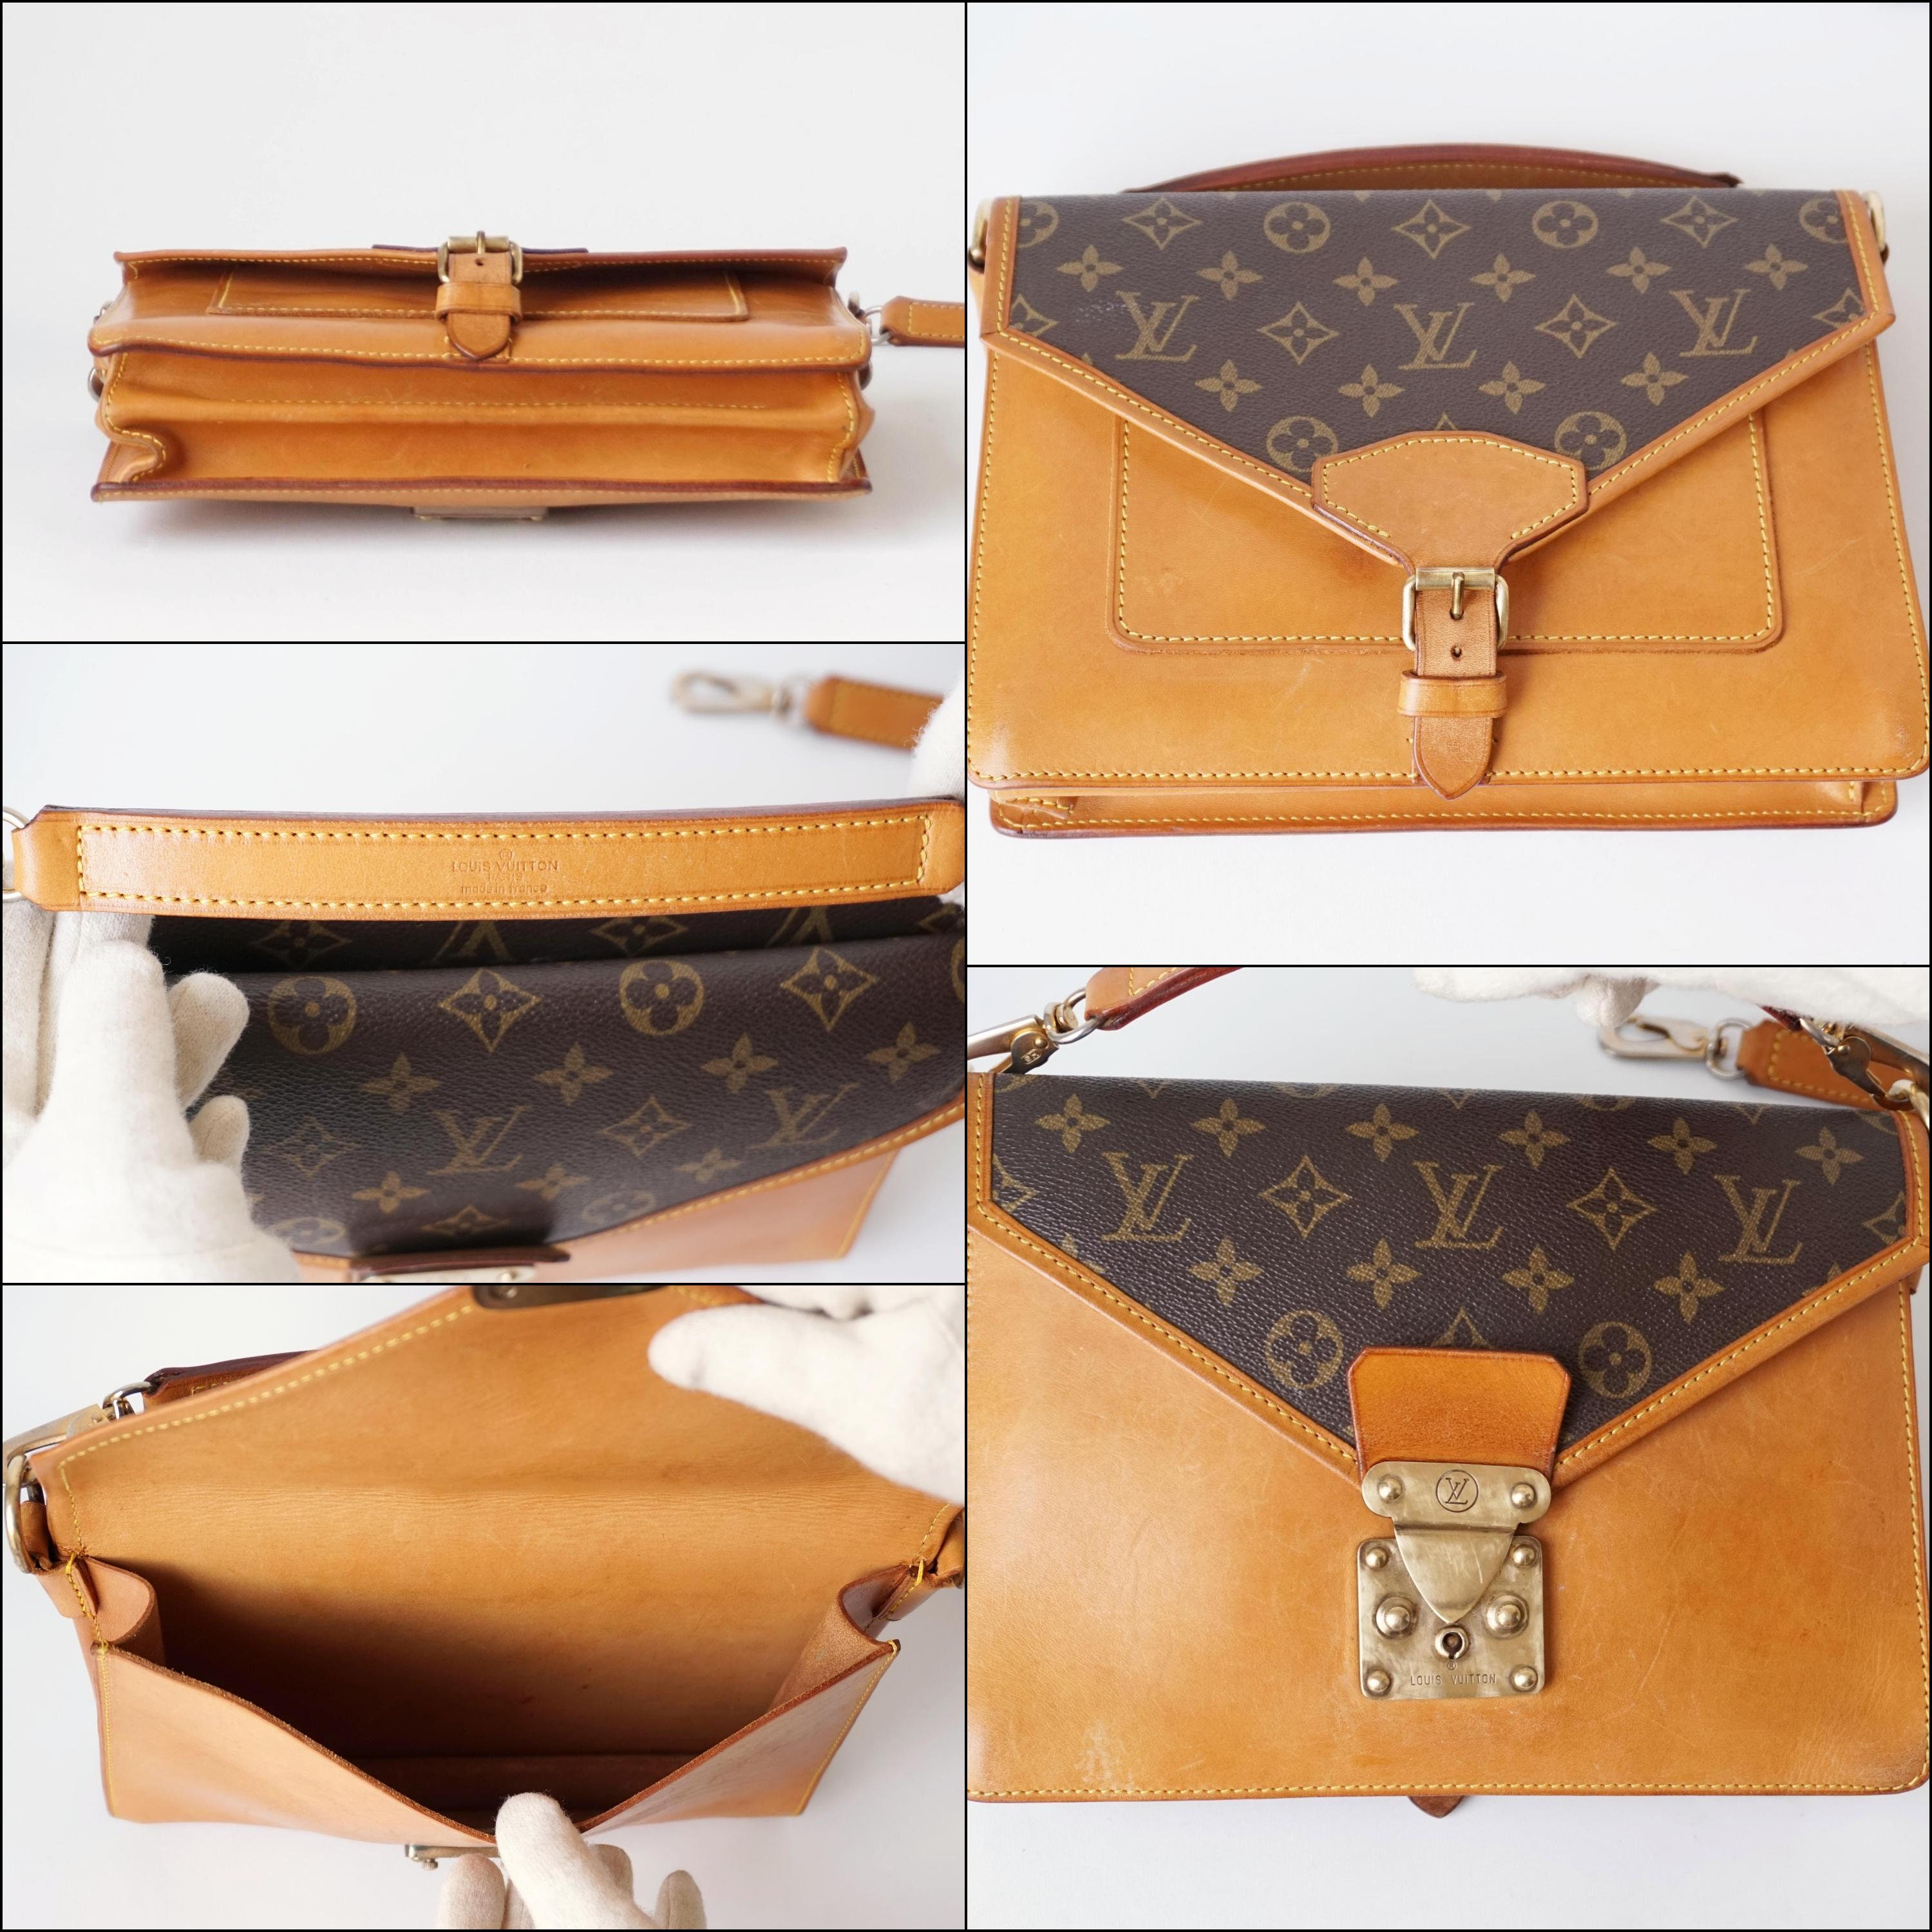 LOUIS VUITTON Biface: Why I Ended Up Returning It